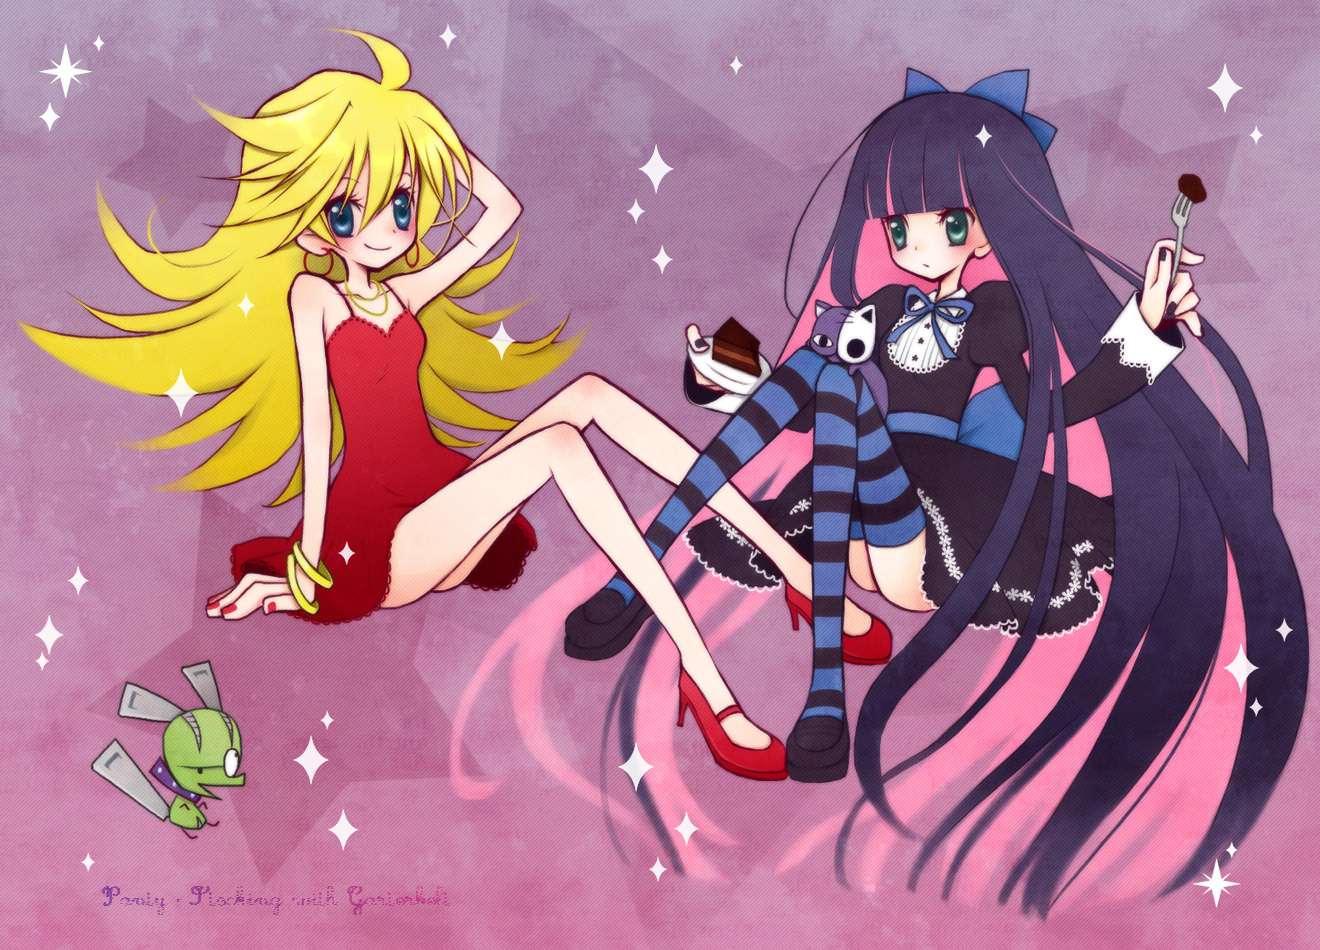 Panty & Stocking from the new anime Panty & Stocking with G...